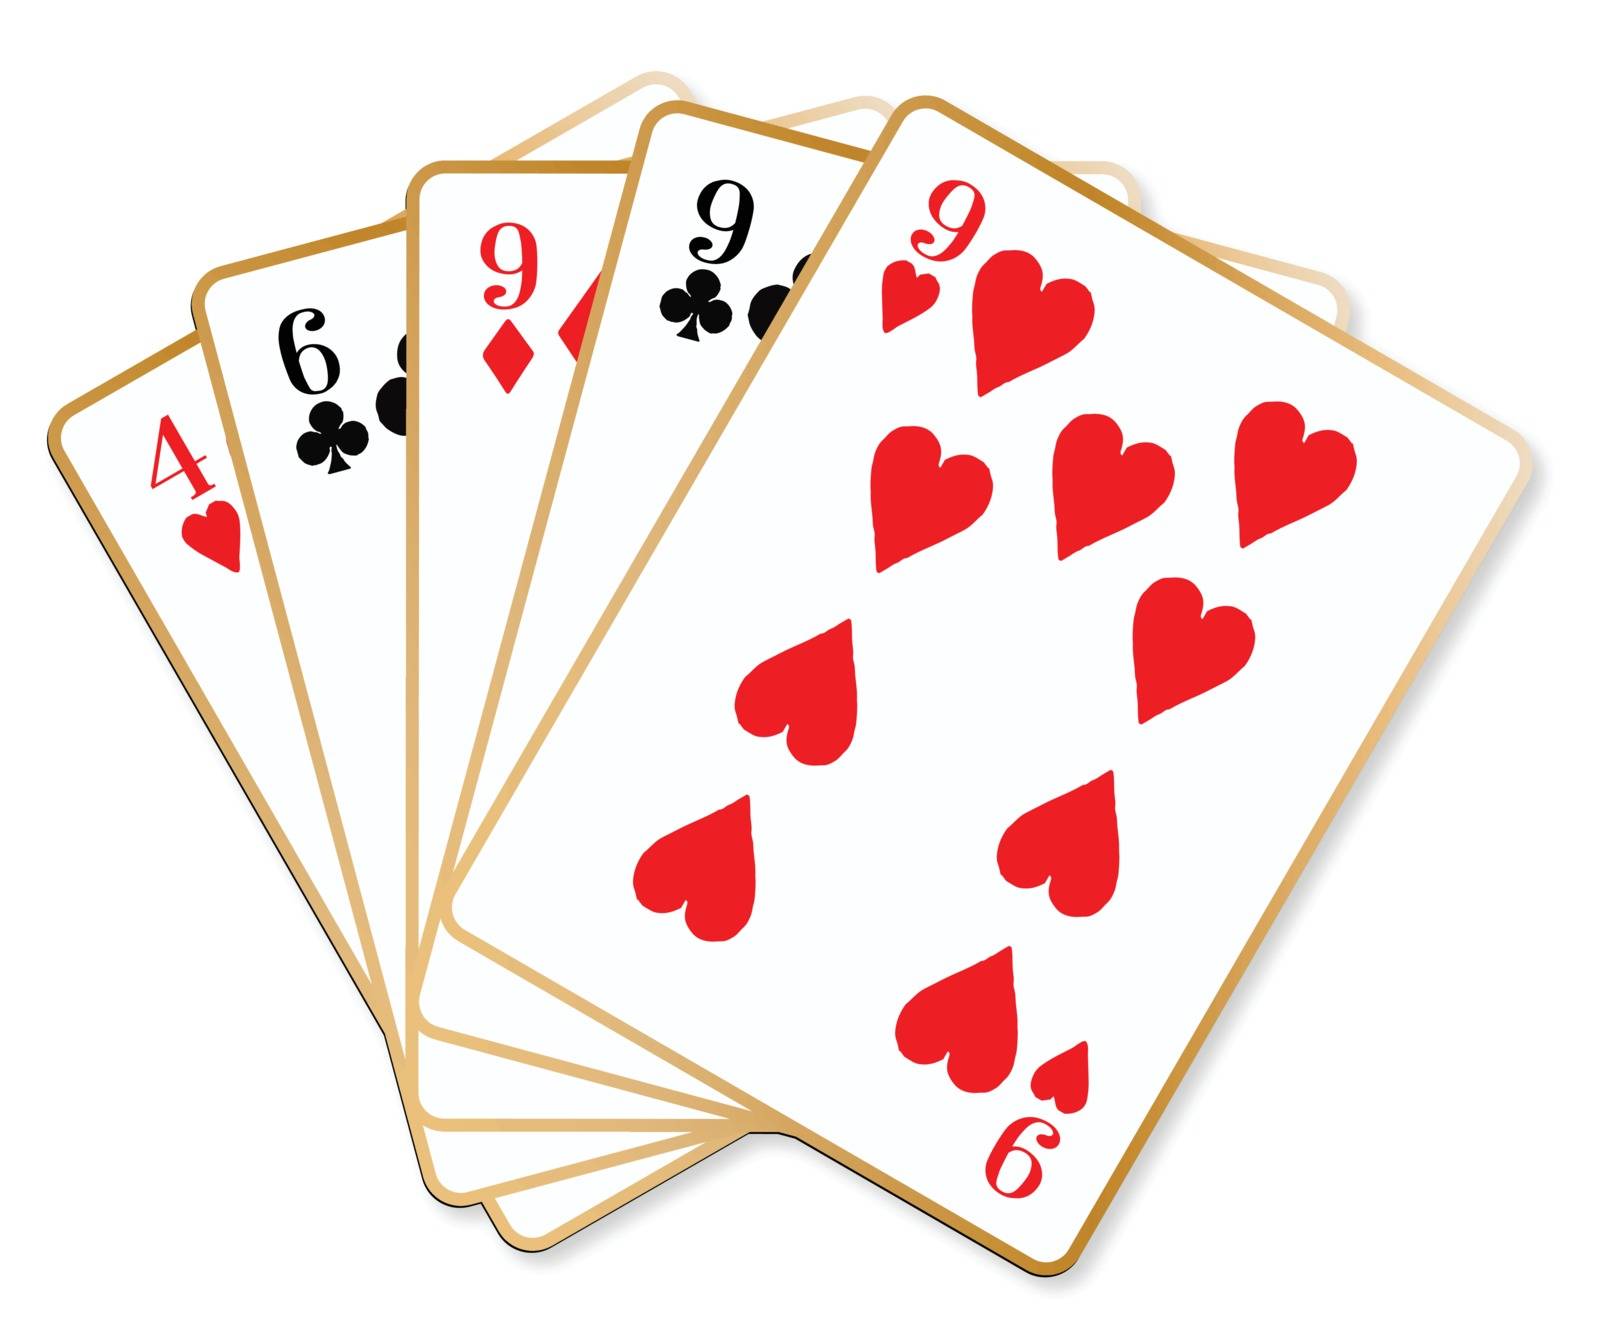 The playing card hand known as three of a kind